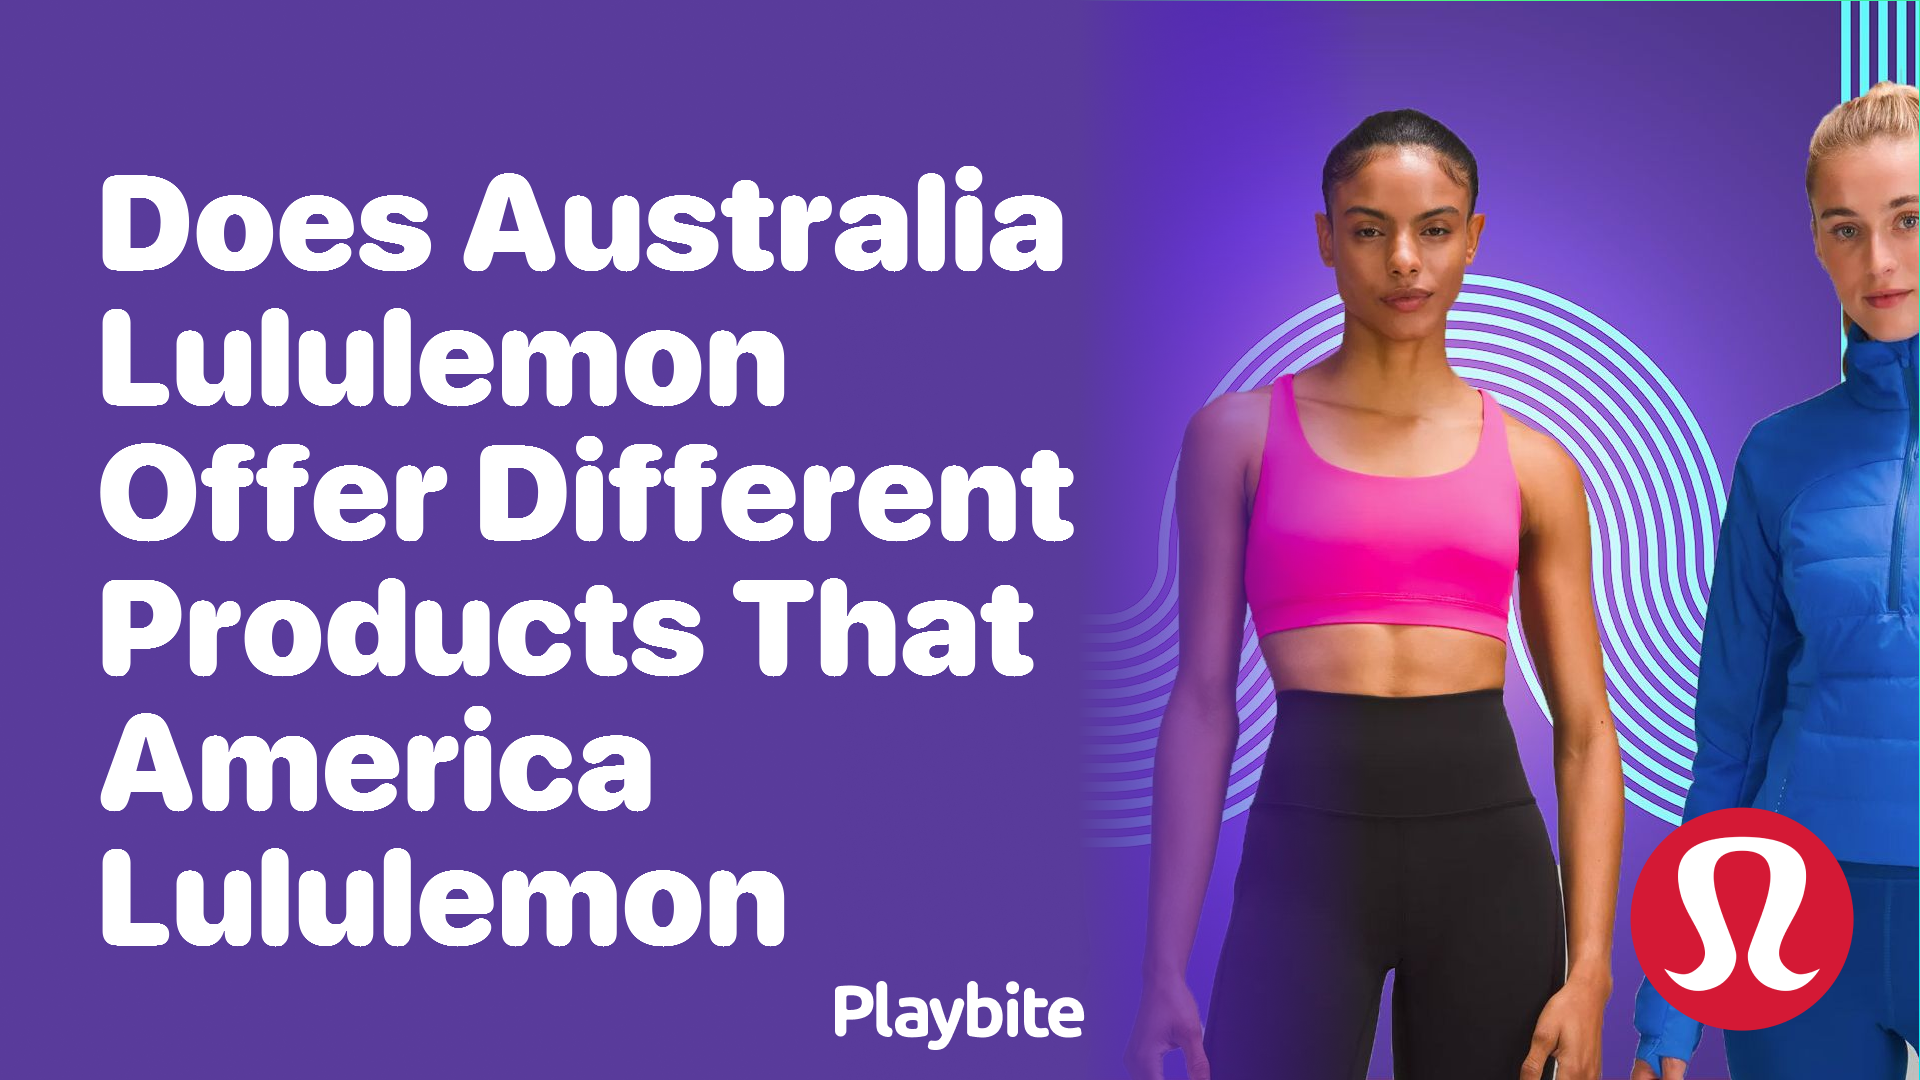 Does Australia Lululemon Offer Different Products Than America Lululemon? -  Playbite